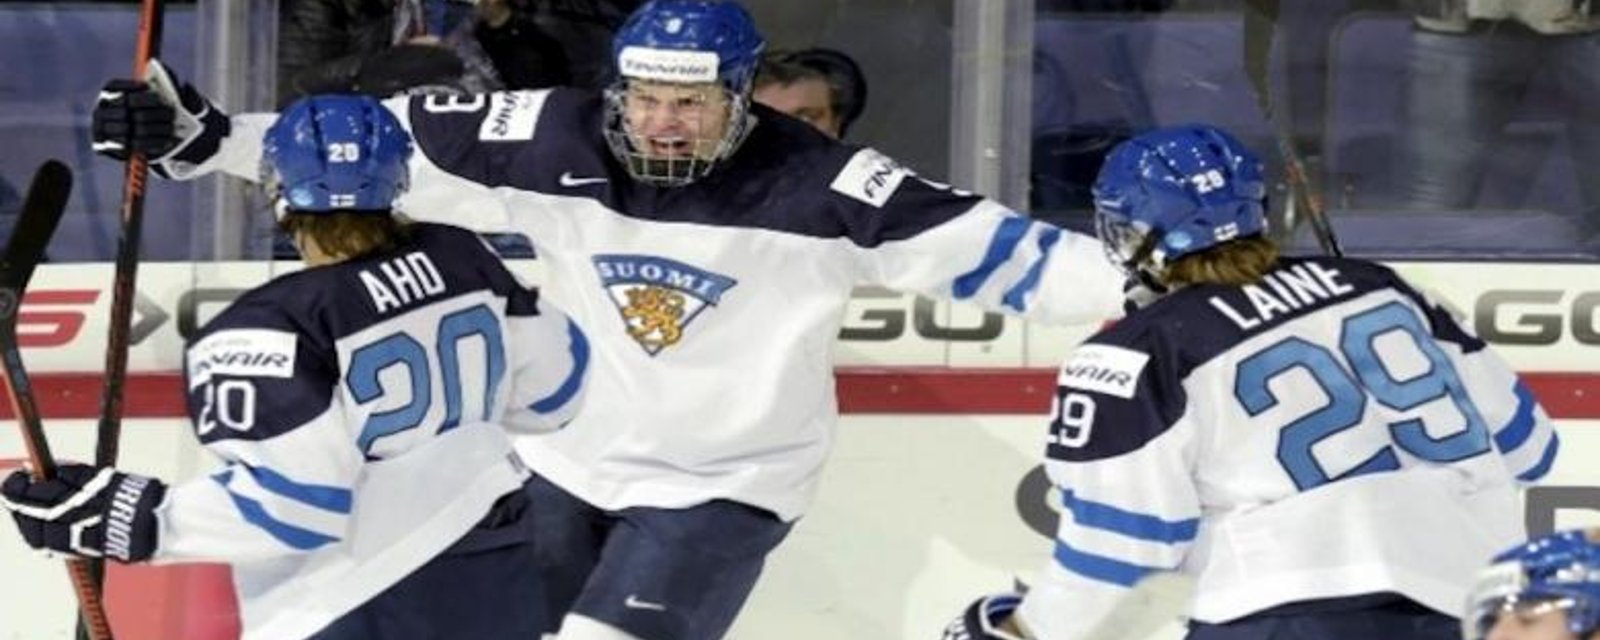 Finland to play Russia for gold at the WJHC.